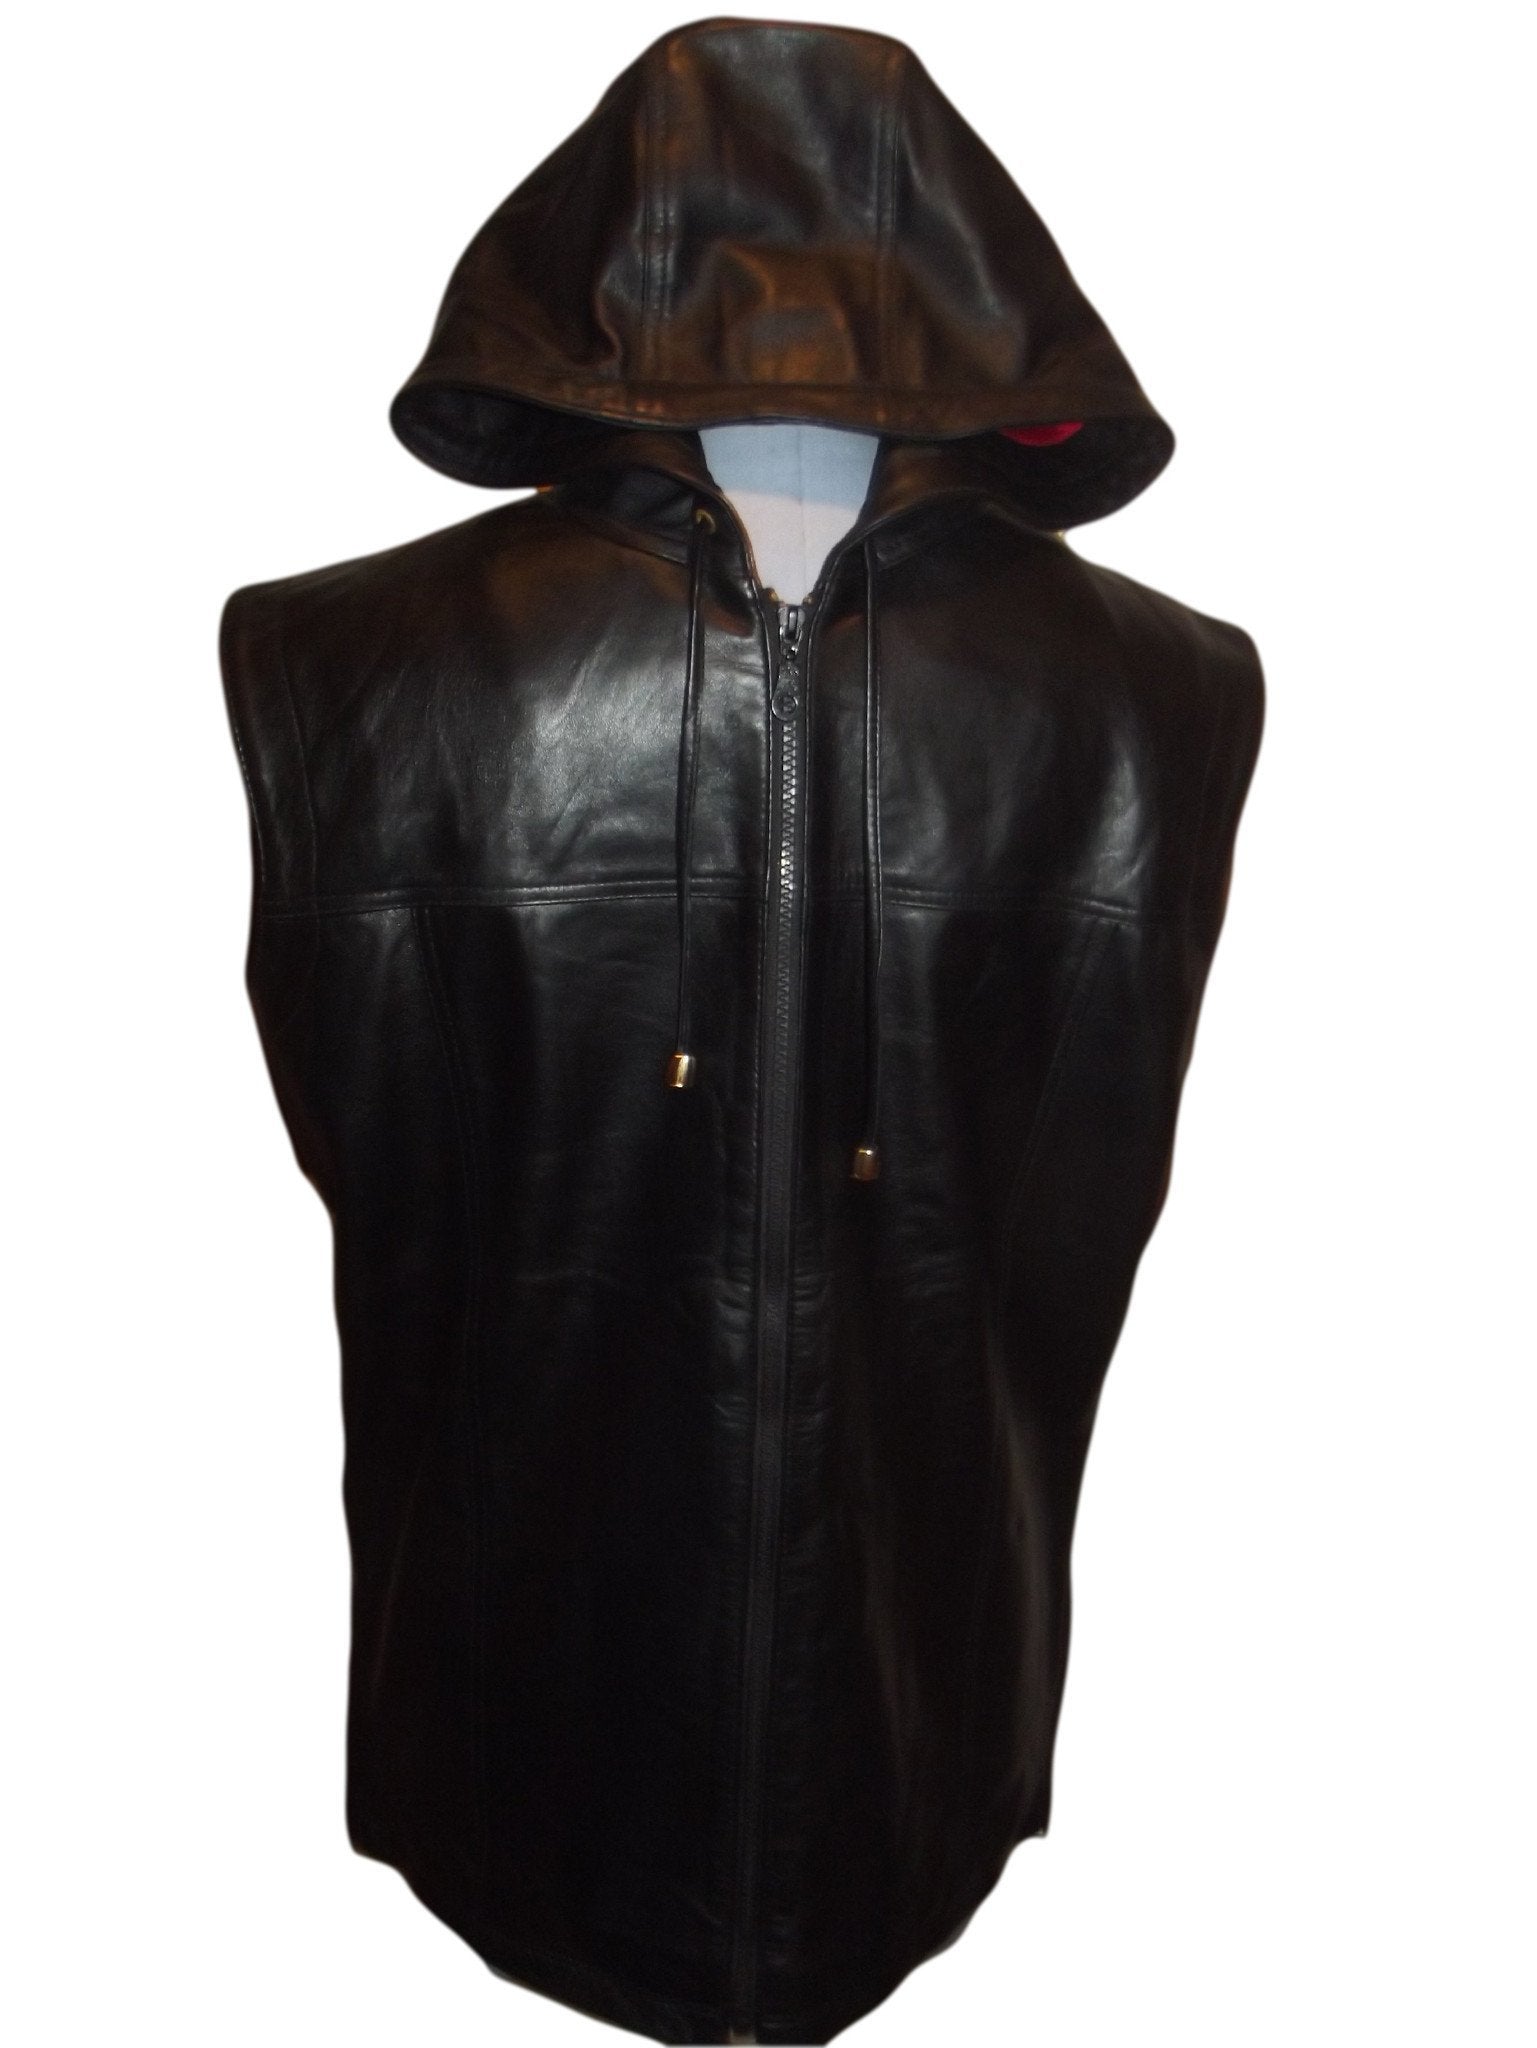 High end designer mens leather clothing at a fair price.